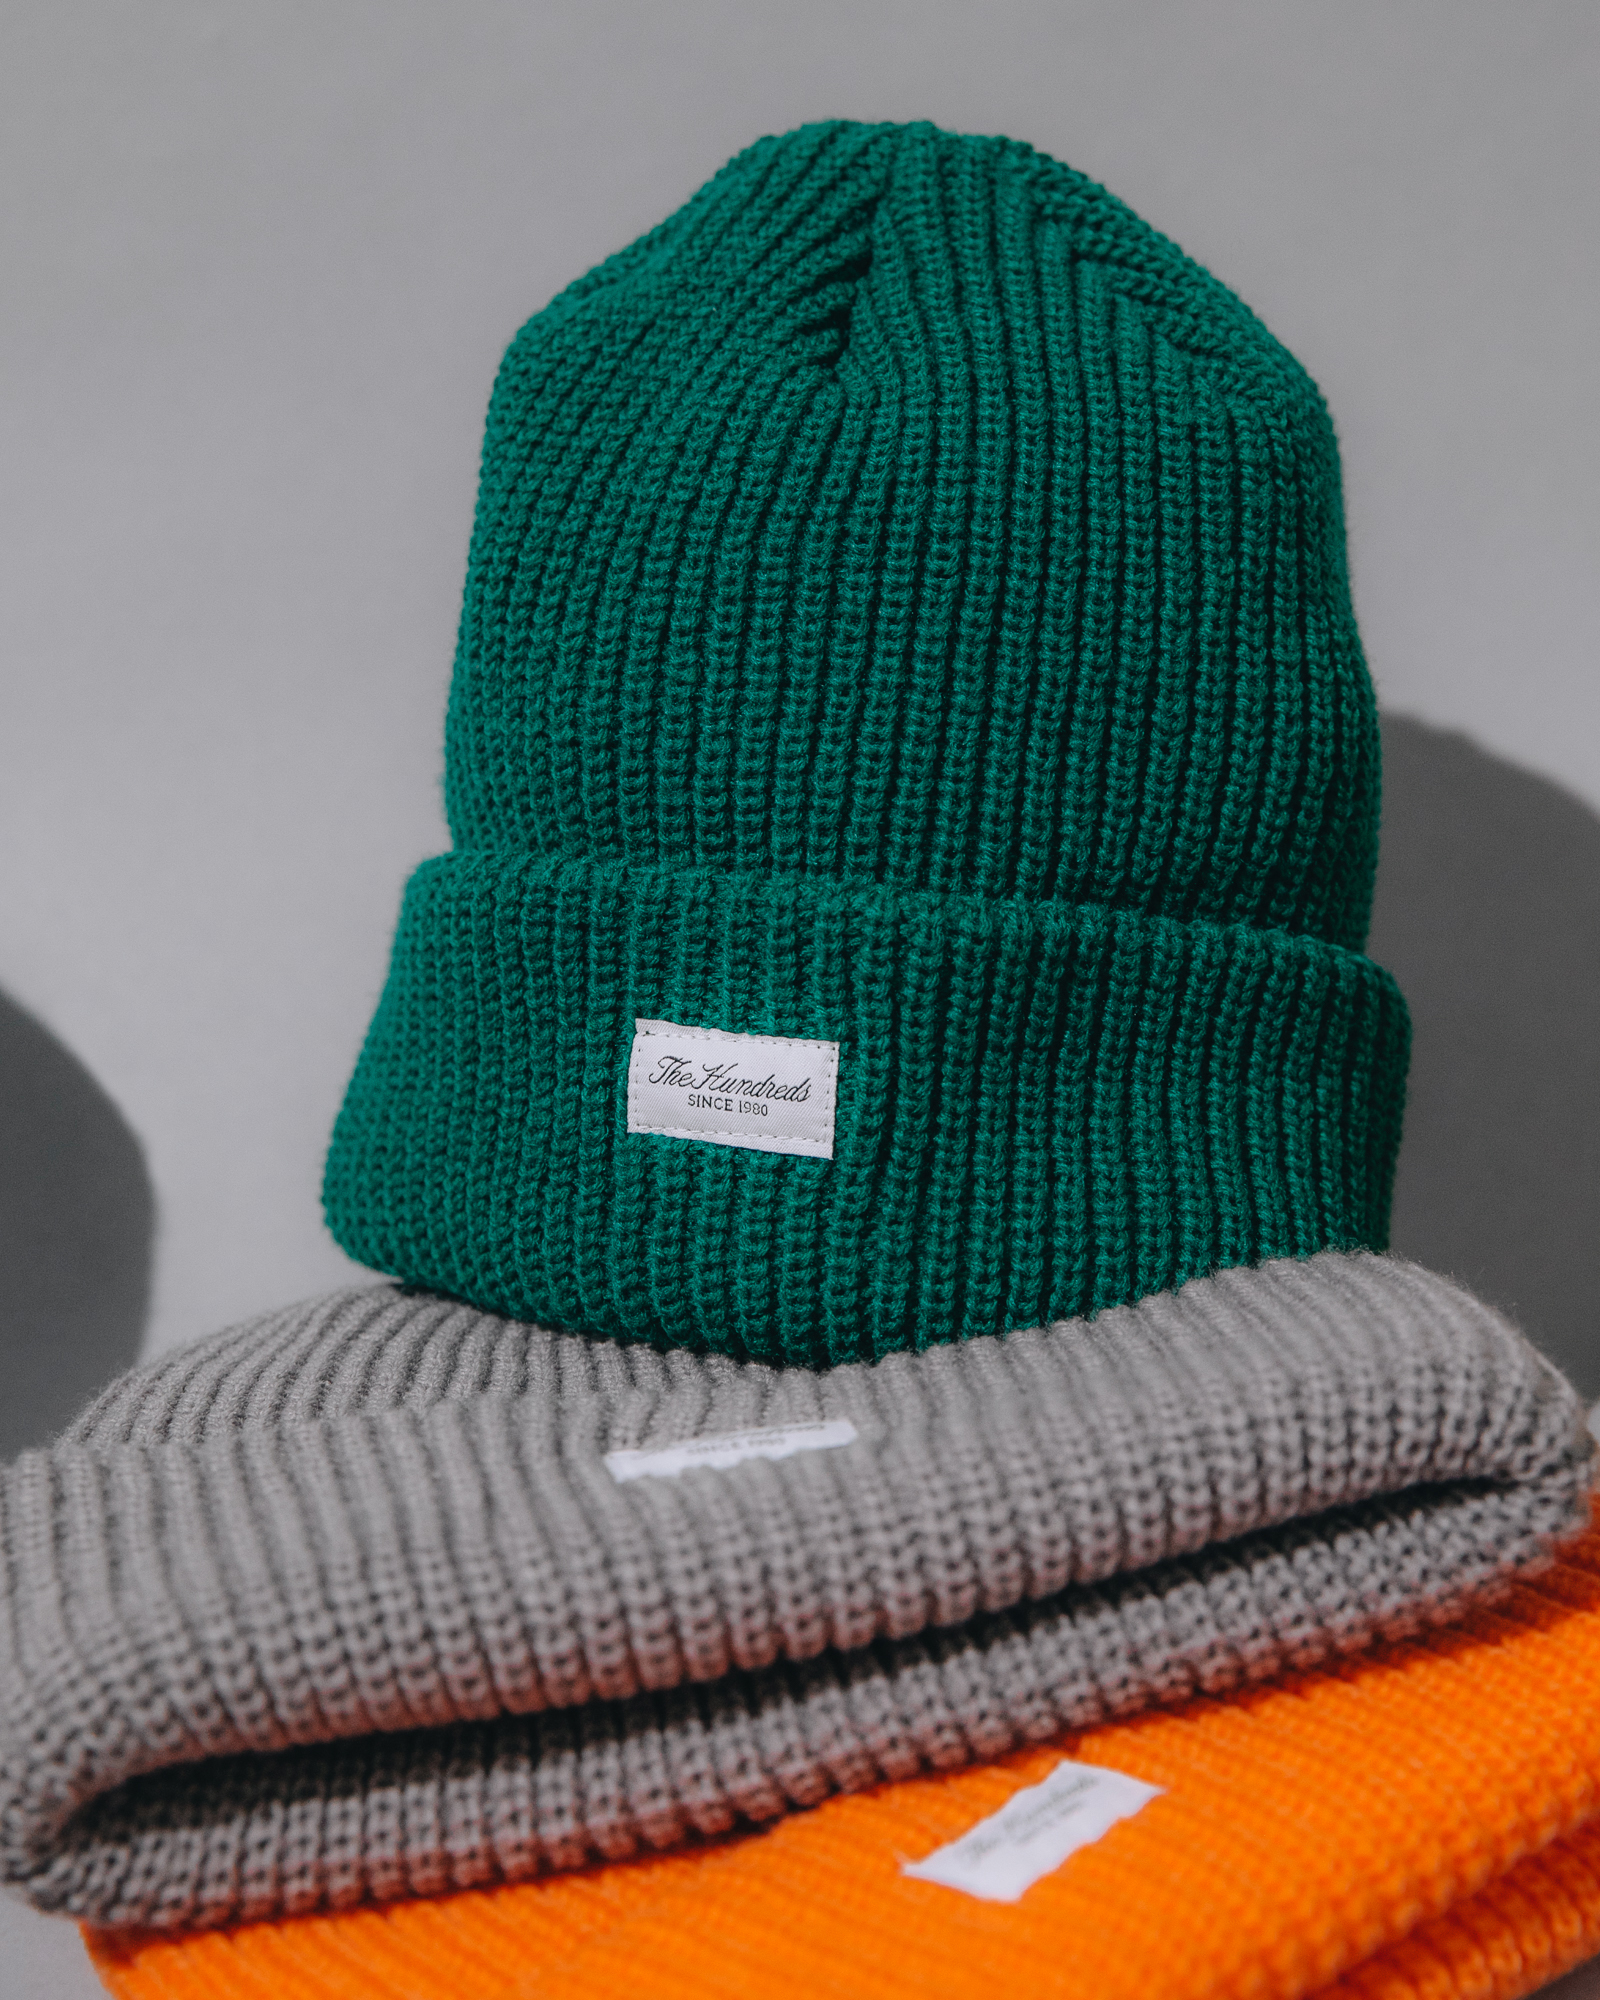 Diskret klippe tæerne The Hundreds on Twitter: "We heard you need more beanies so here you go! The  Crisp Beanie and other fall headwear are now available on The Hundreds'  website :: https://t.co/sAr1q21FXK https://t.co/jBCmh0EIWB" /